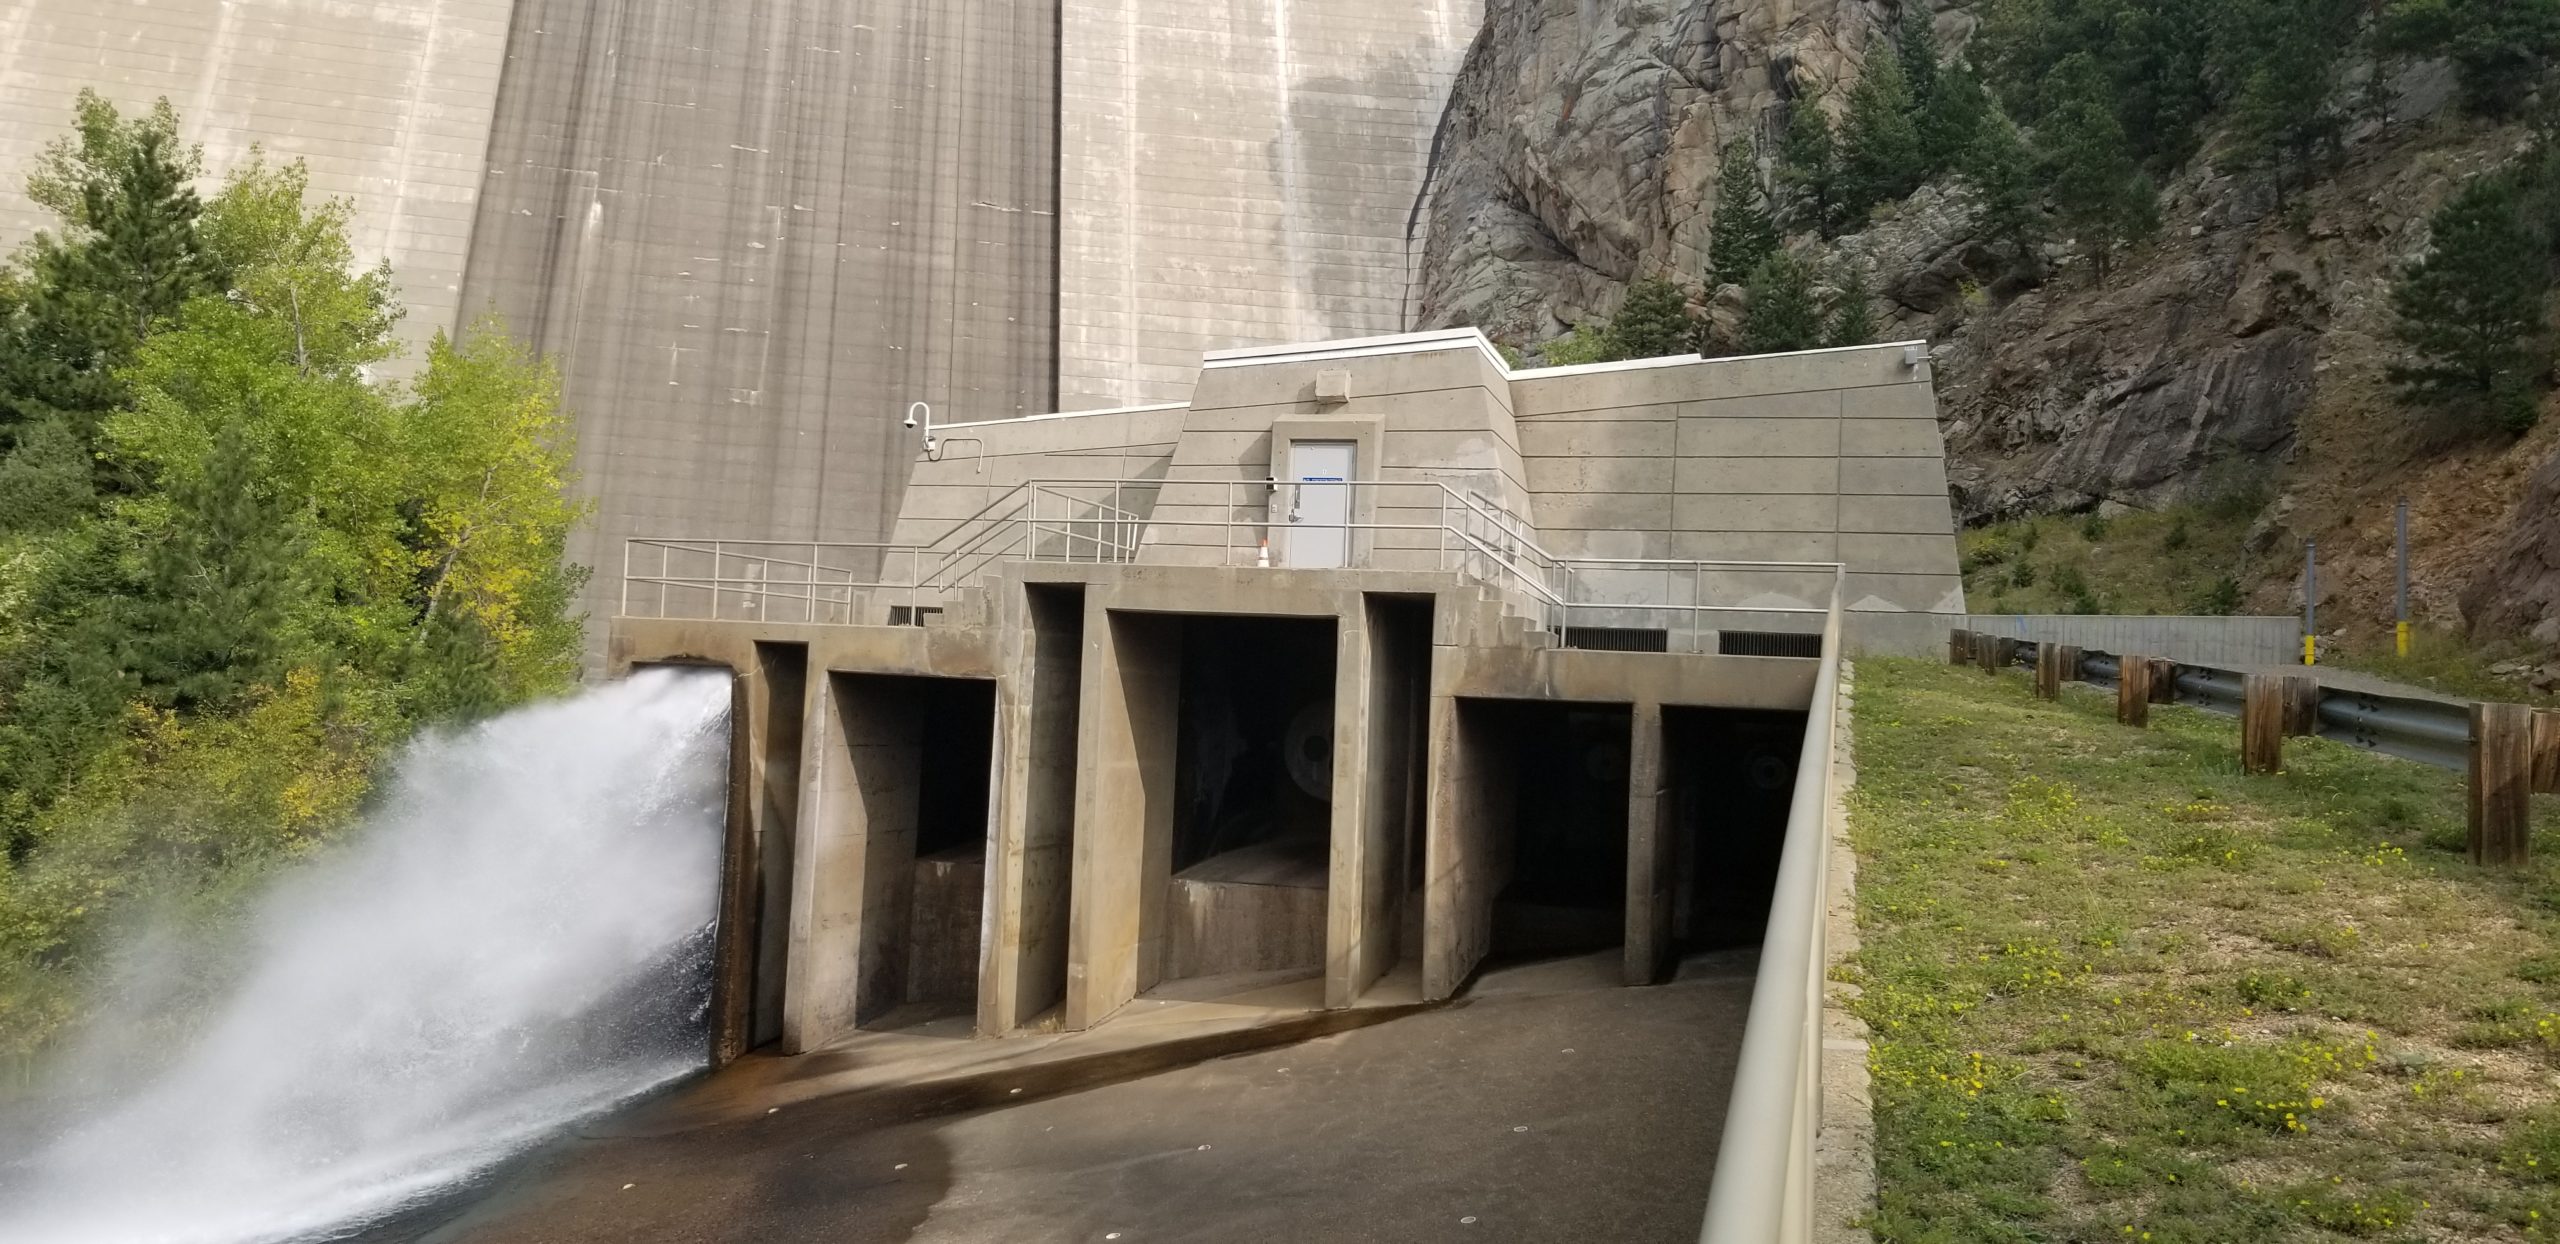 Outlet works ensure dams can safely discharge reservoir water into streams and canals at the base of the dam face. Photo credit: Denver Water.